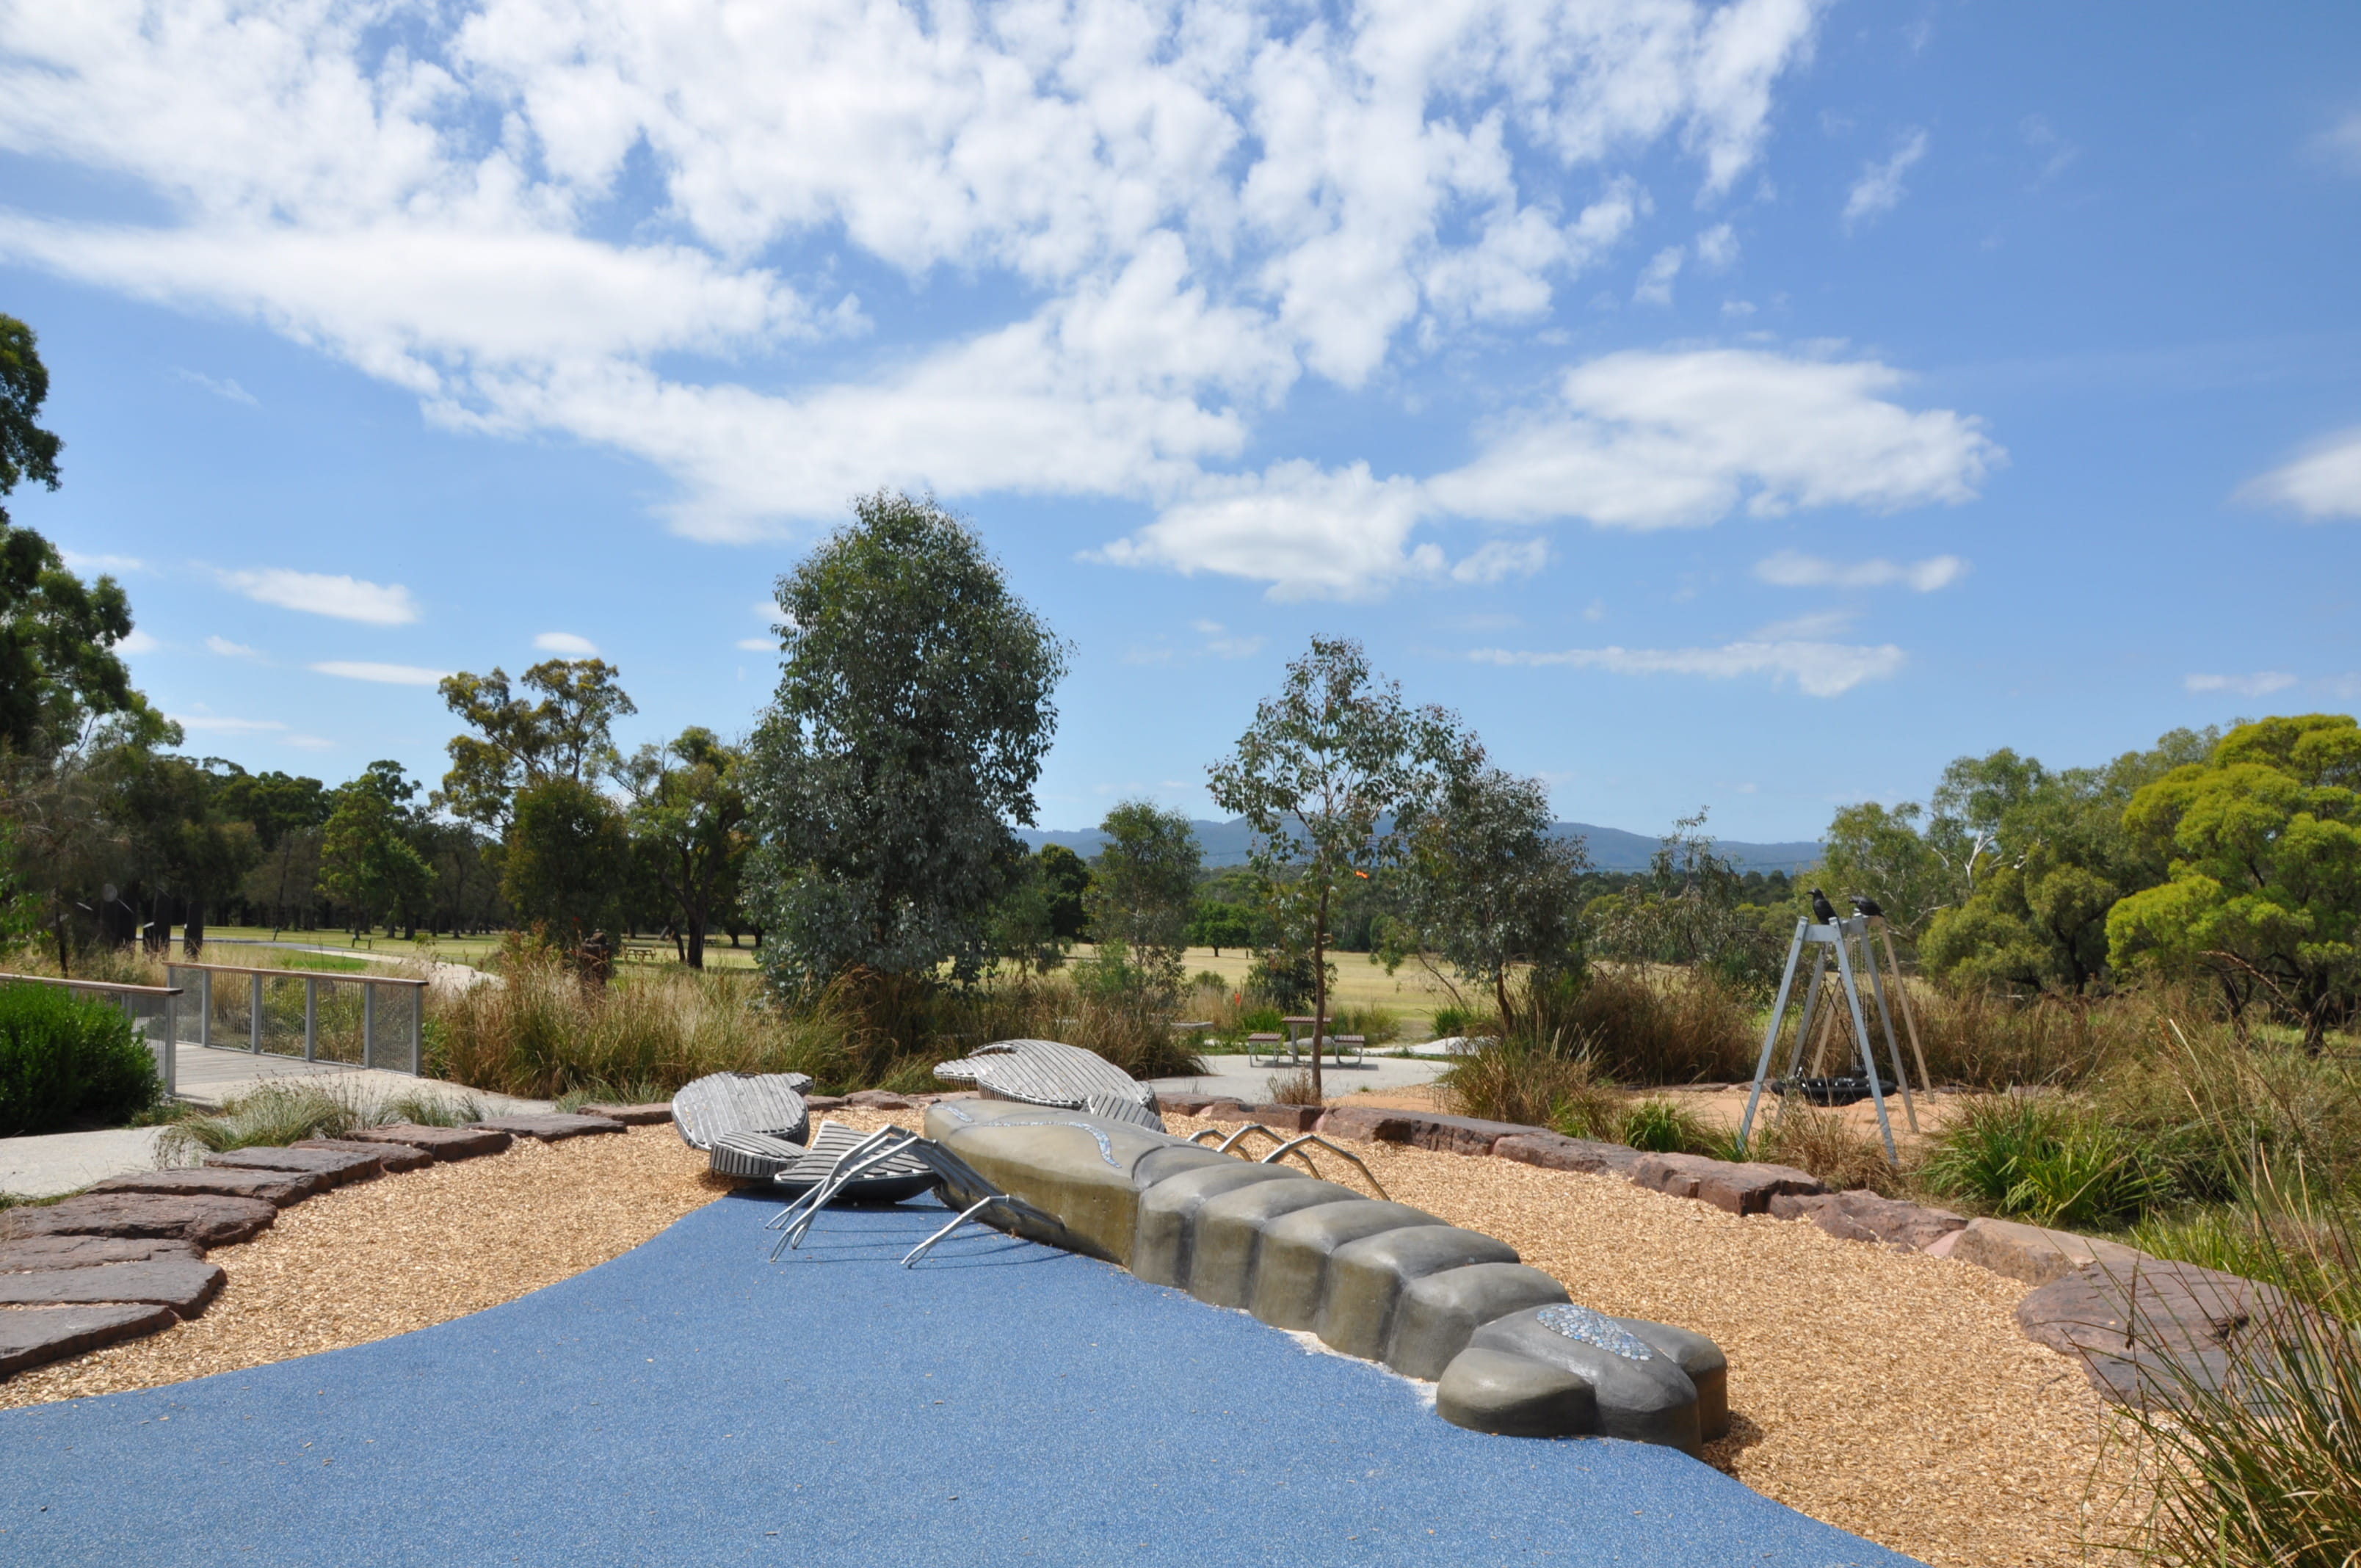 Playground with wide path and low metal play sculpture of a lizard